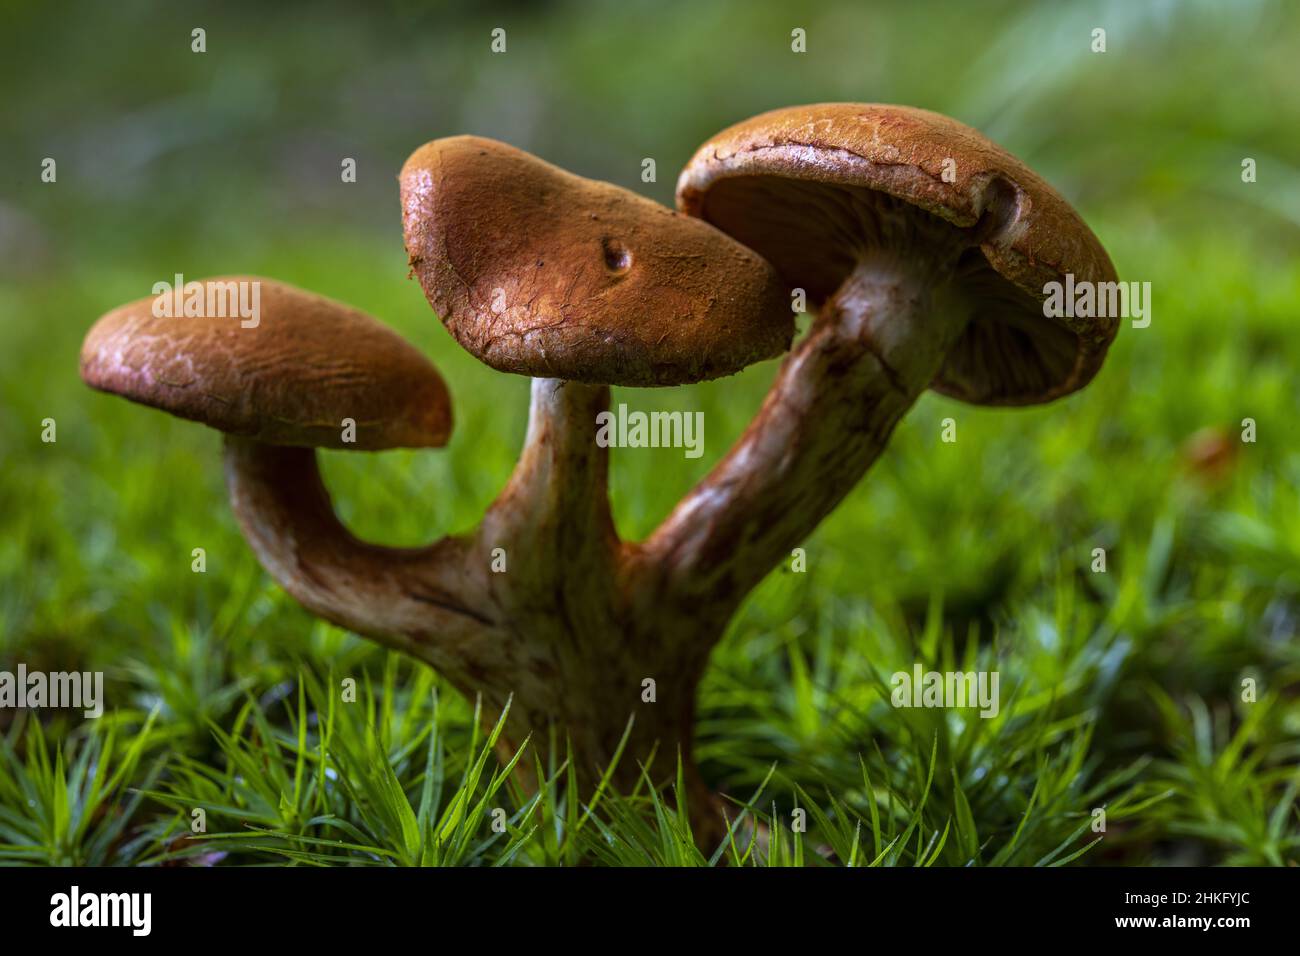 France, Somme, Crécy-en-Ponthieu, Crécy forest, Mushroom, Cortinarius rubicundulus Stock Photo